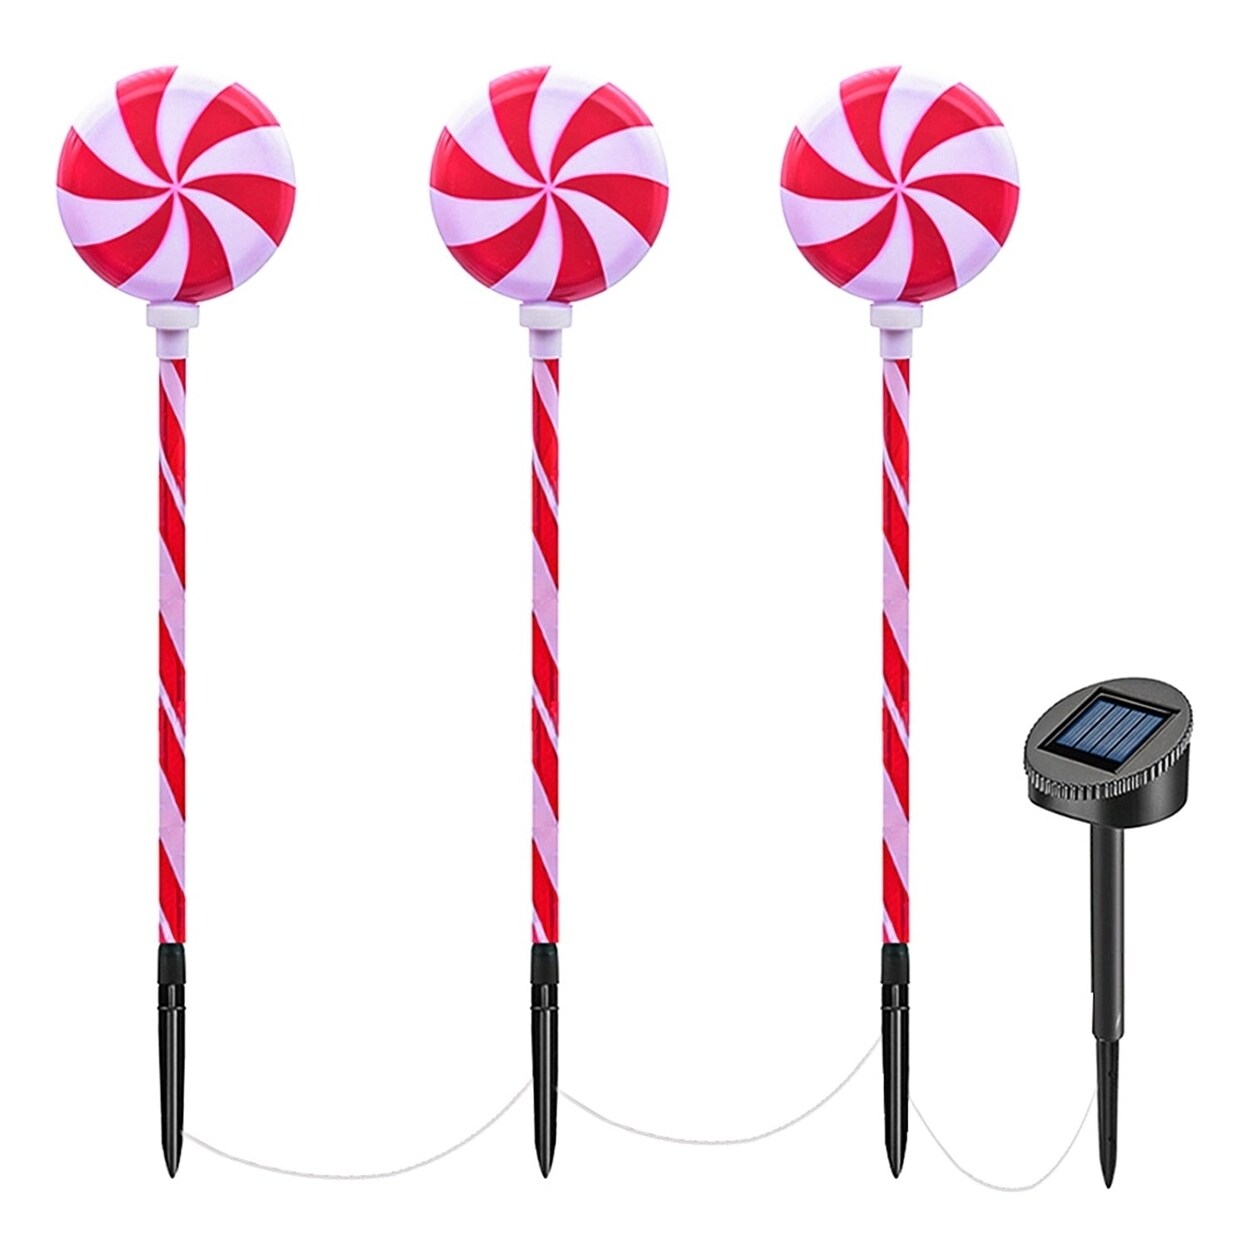 SKUSHOPS Solar Christmas Candy Light Set of 3 IP65 Waterproof Solar Lollipops Stake Lamp for Patio Yard Garden Pathway Christmas